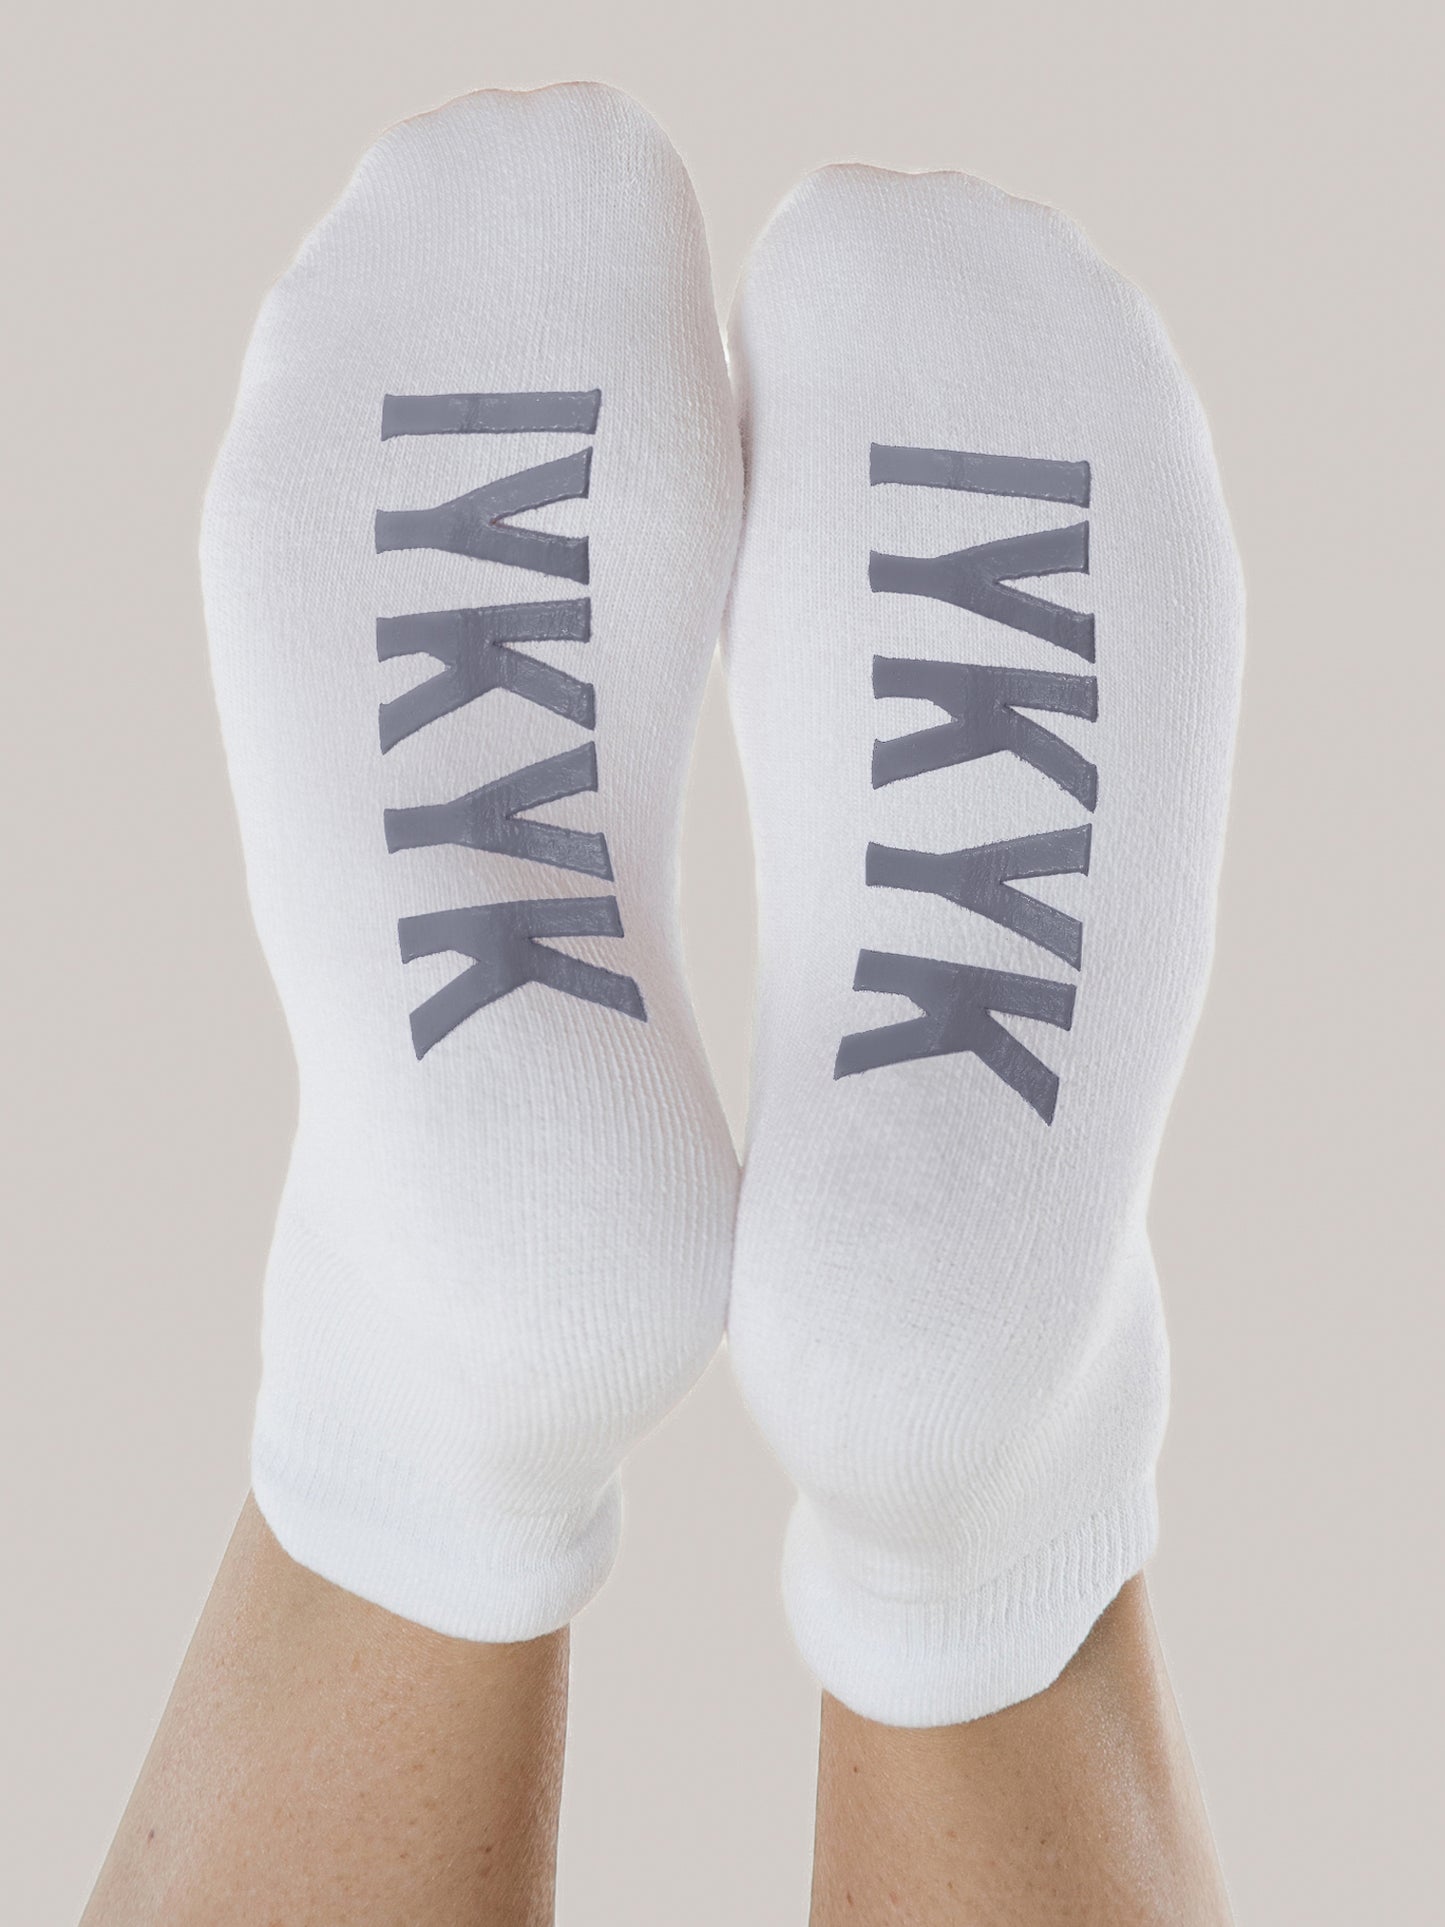 Labor & Delivery Socks with IYKYK printed at the bottom